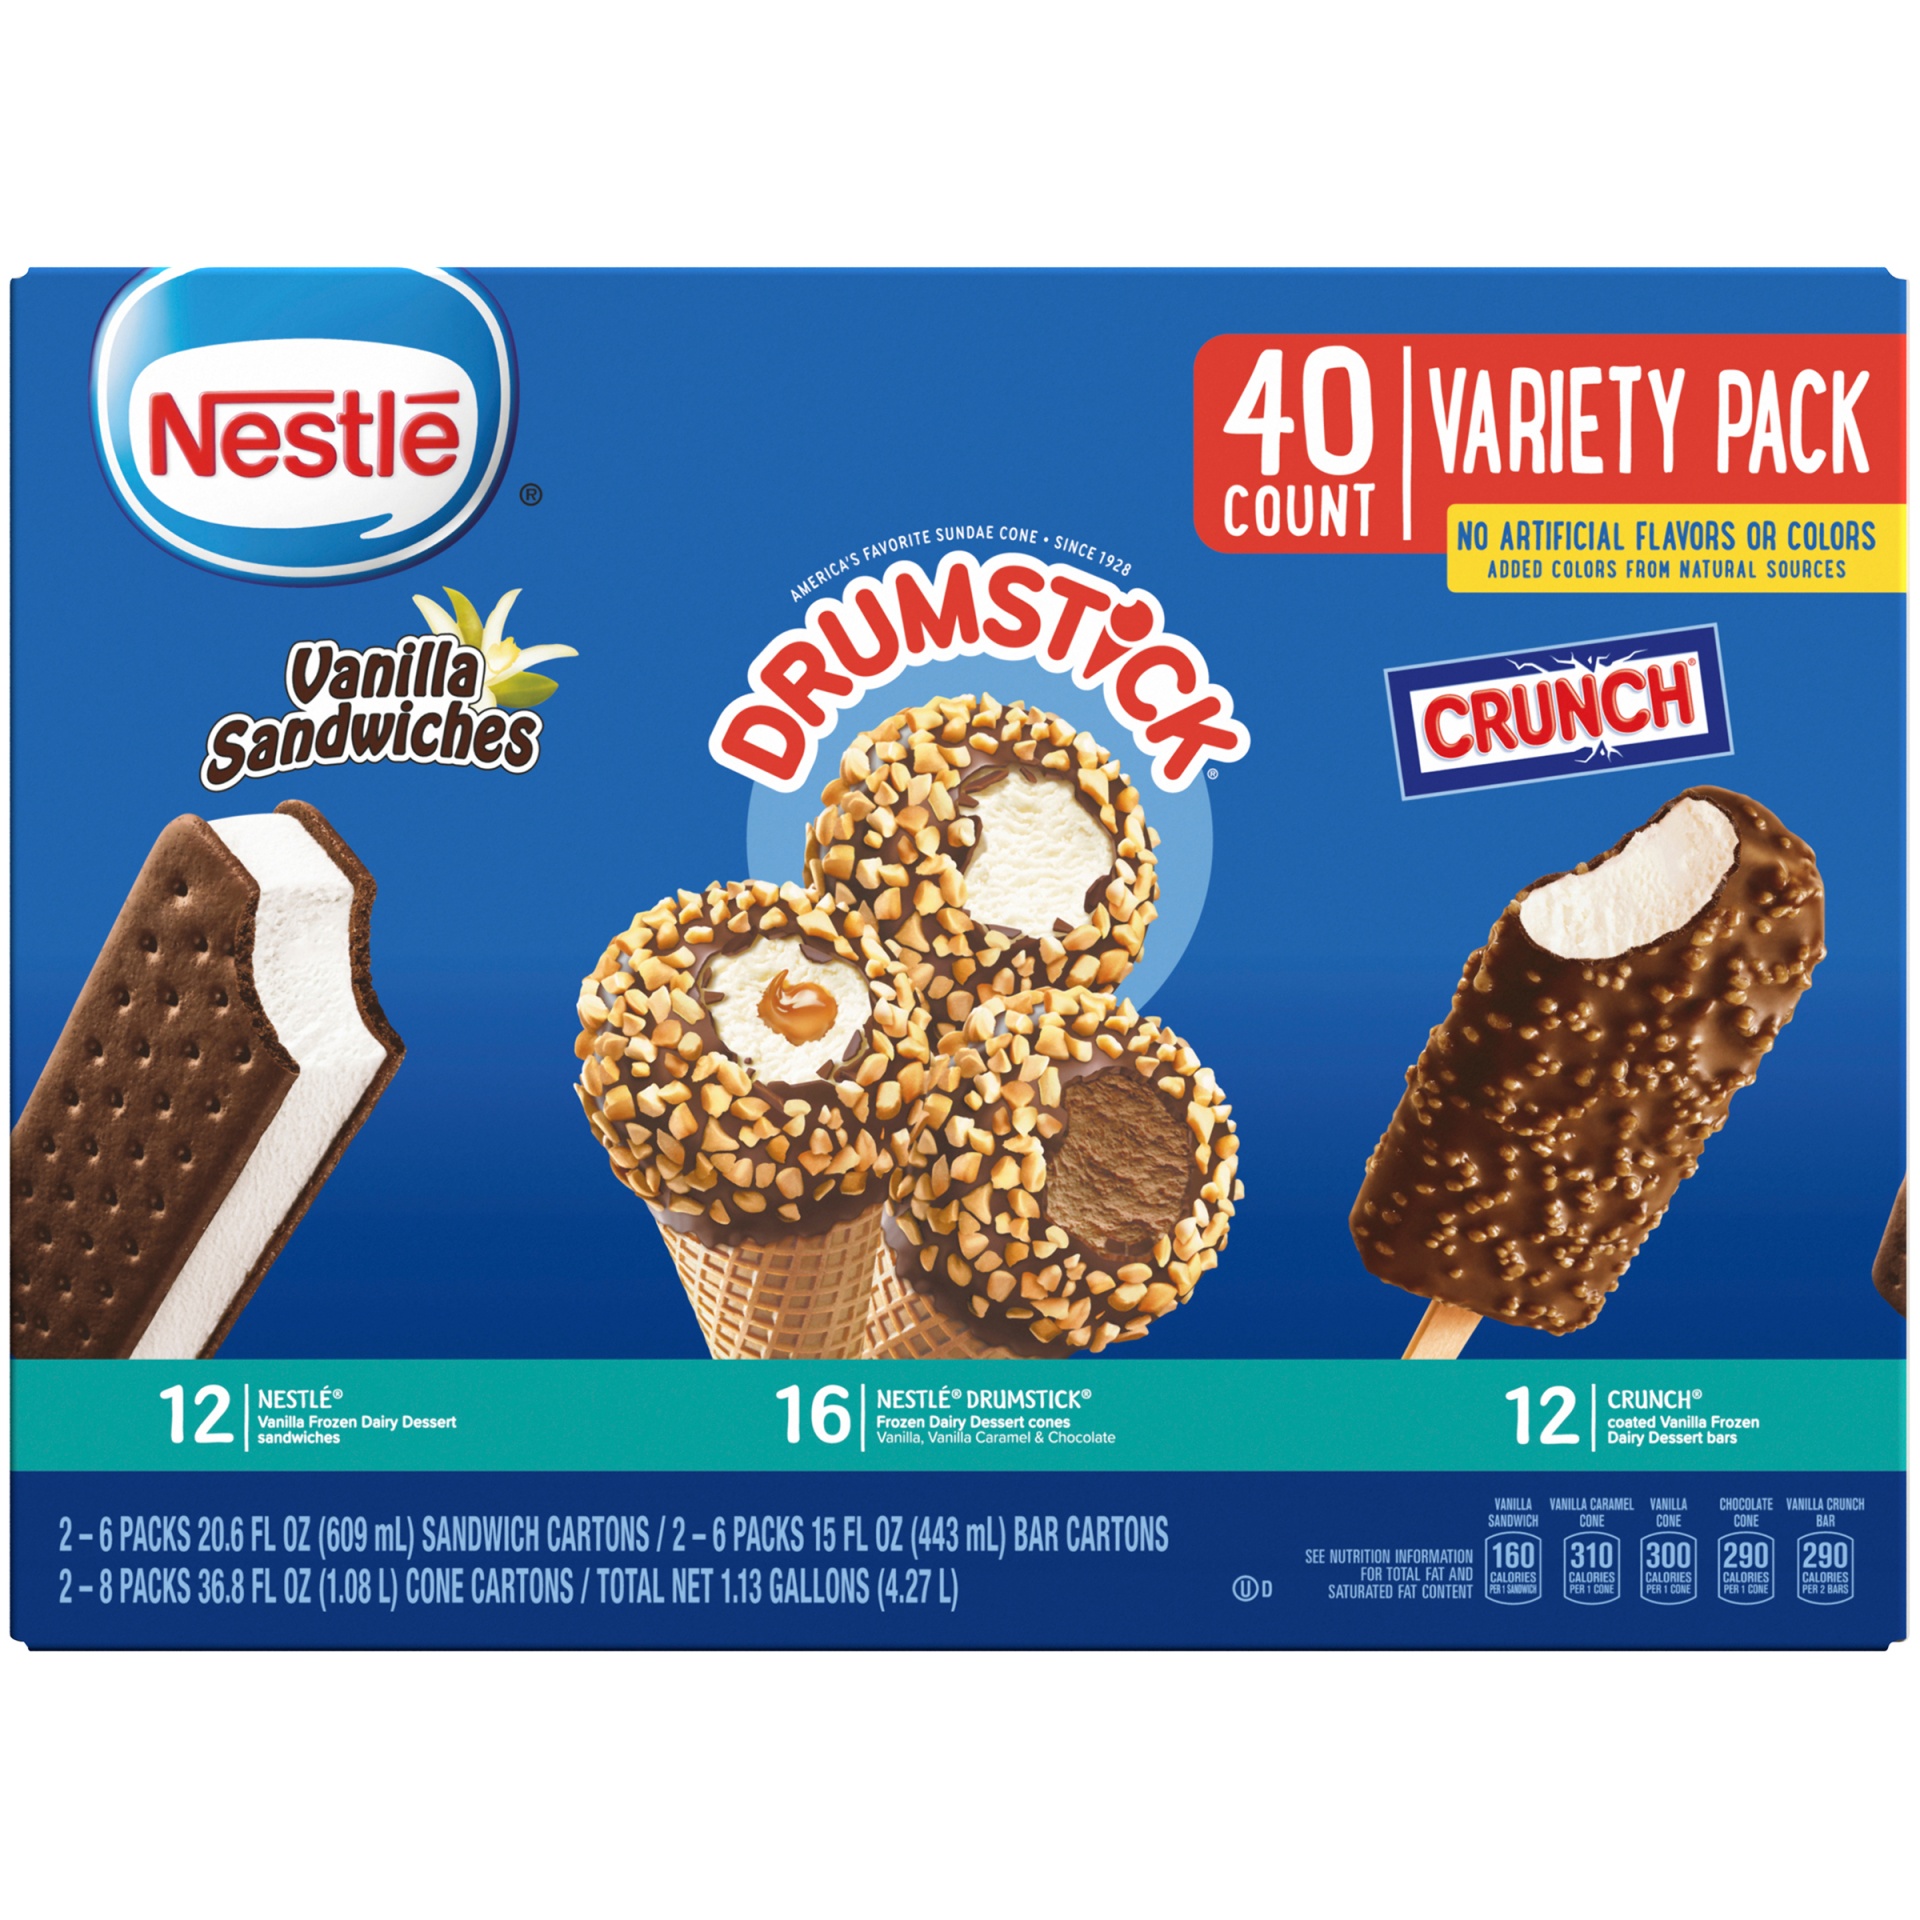 Costco Has A 40-Count Variety Pack Of Ice Cream